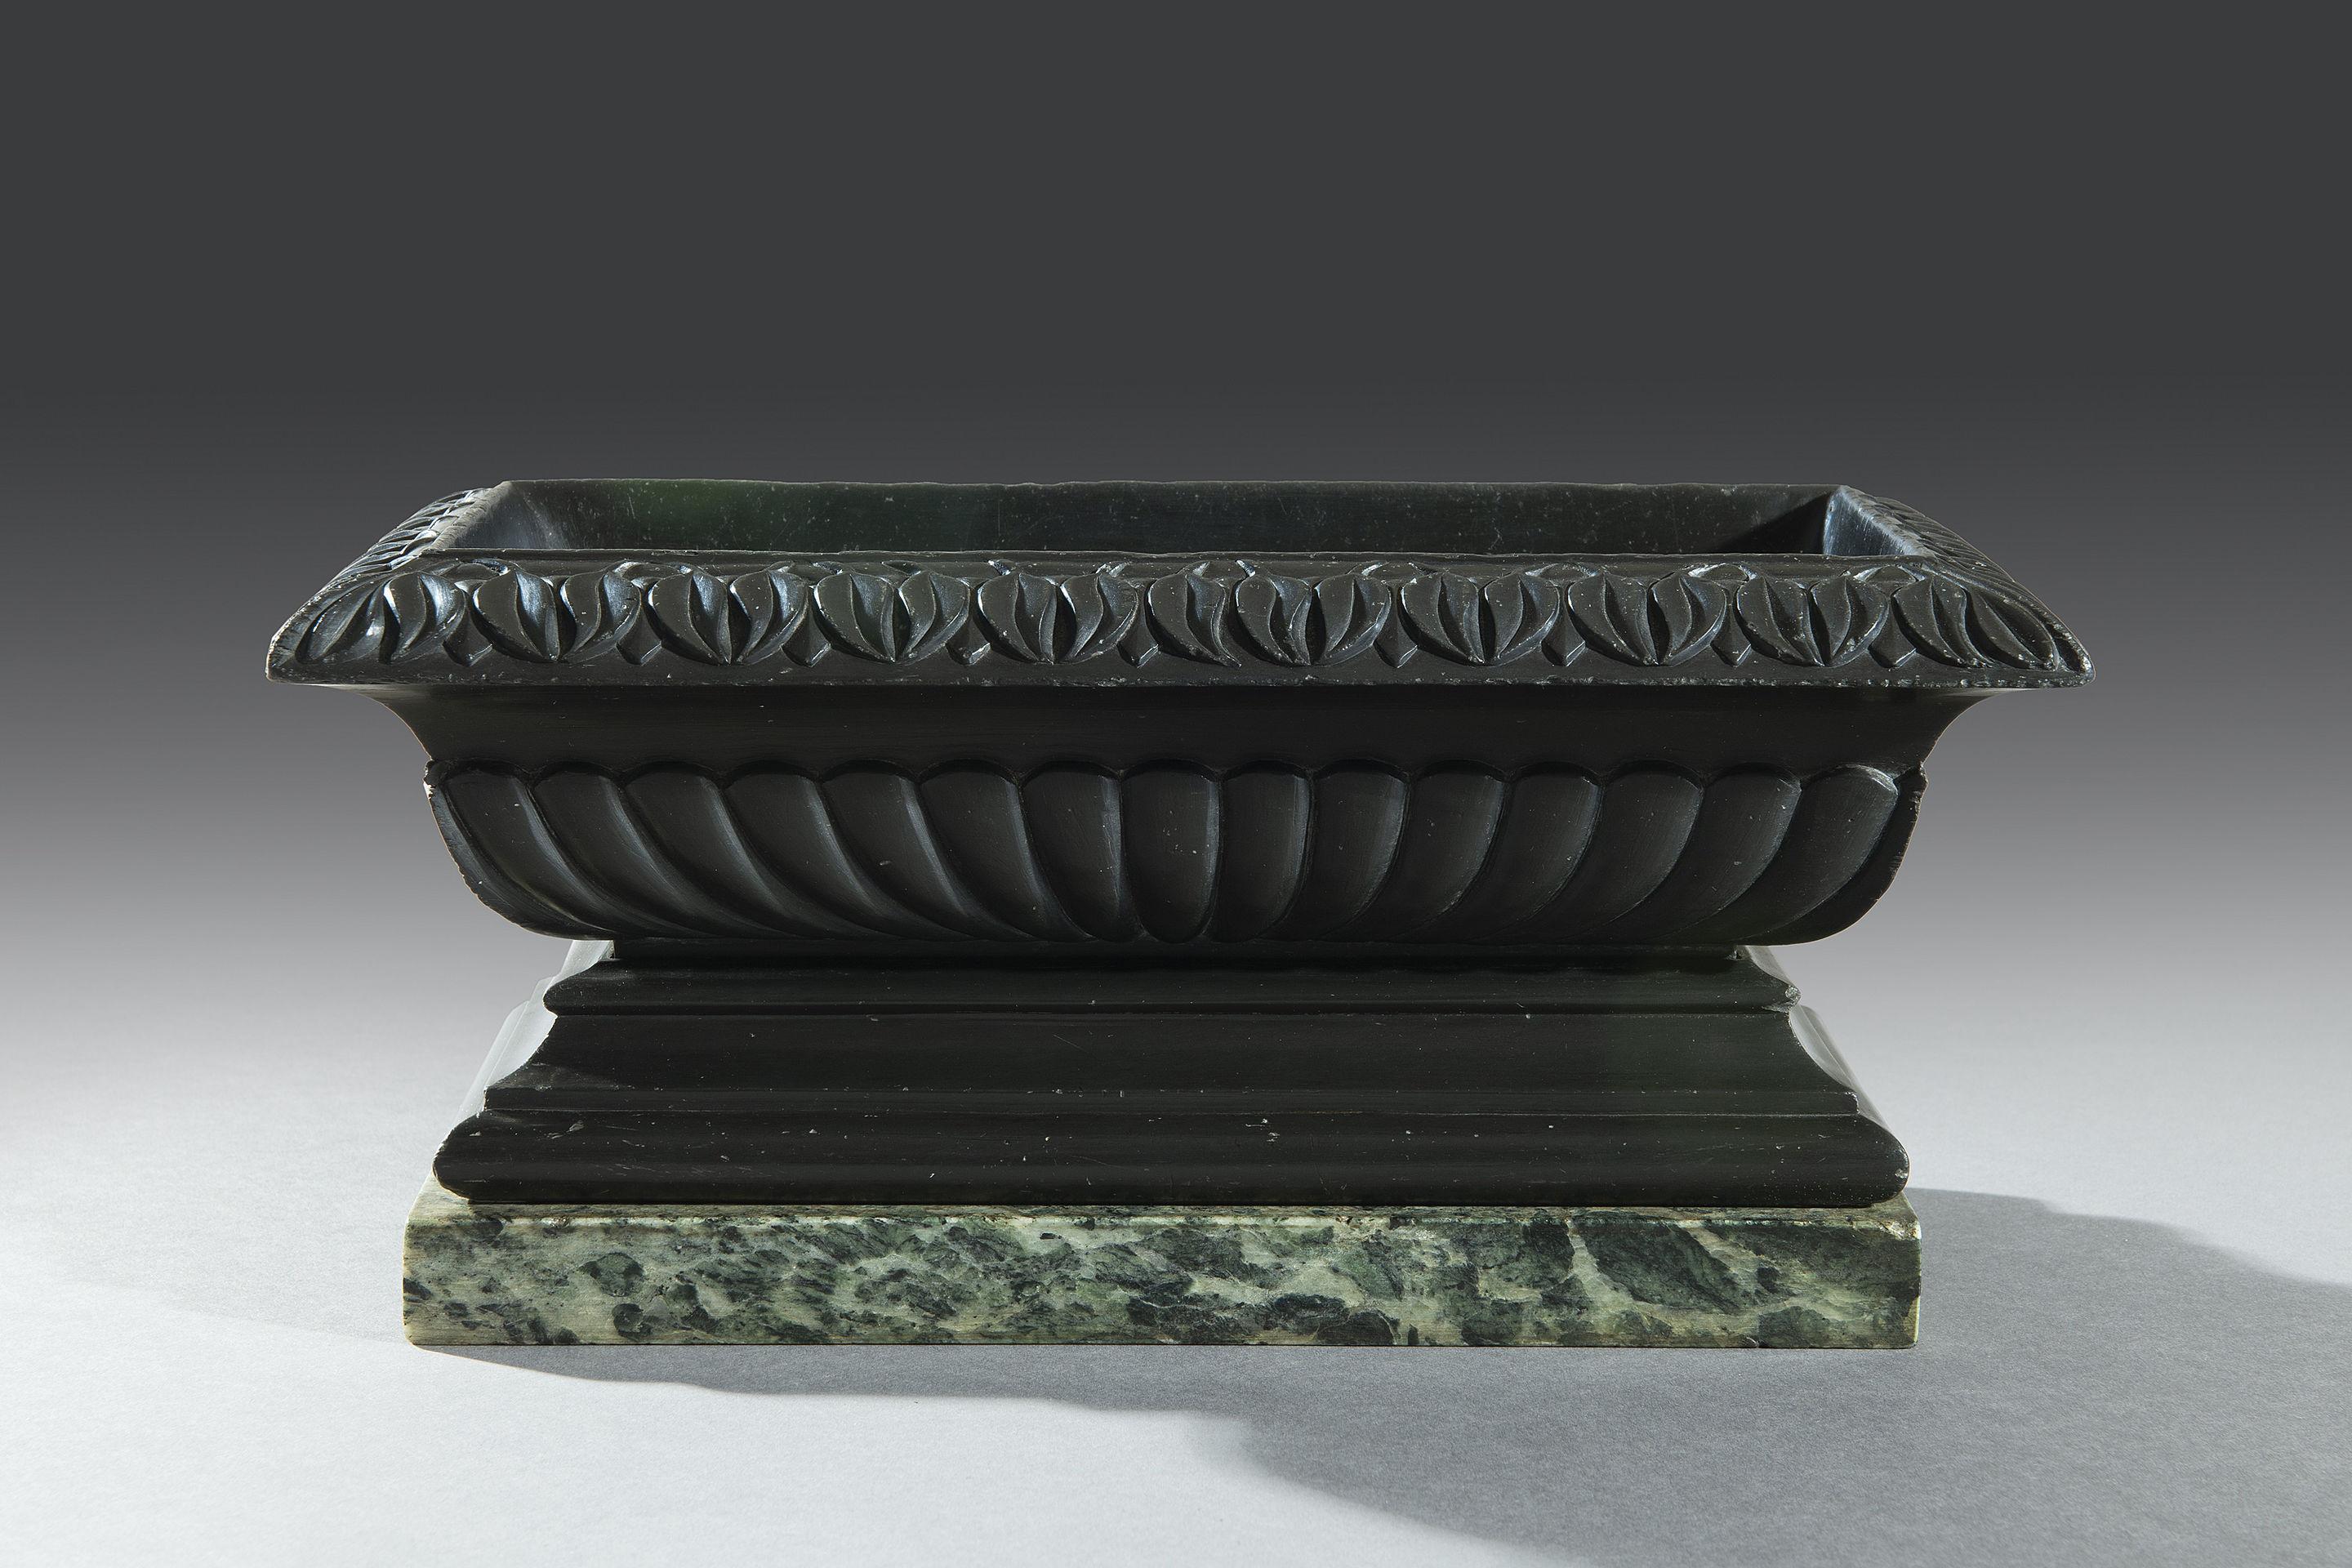 The Nero Belgio marble sarcophagus shaped bath or 'cistern' is embellished with stiff leaf borders and carved gadrooning to the body. The cistern sits a double bevelled plinth surmounted on a green marble with white quartz veins. The marble plinth